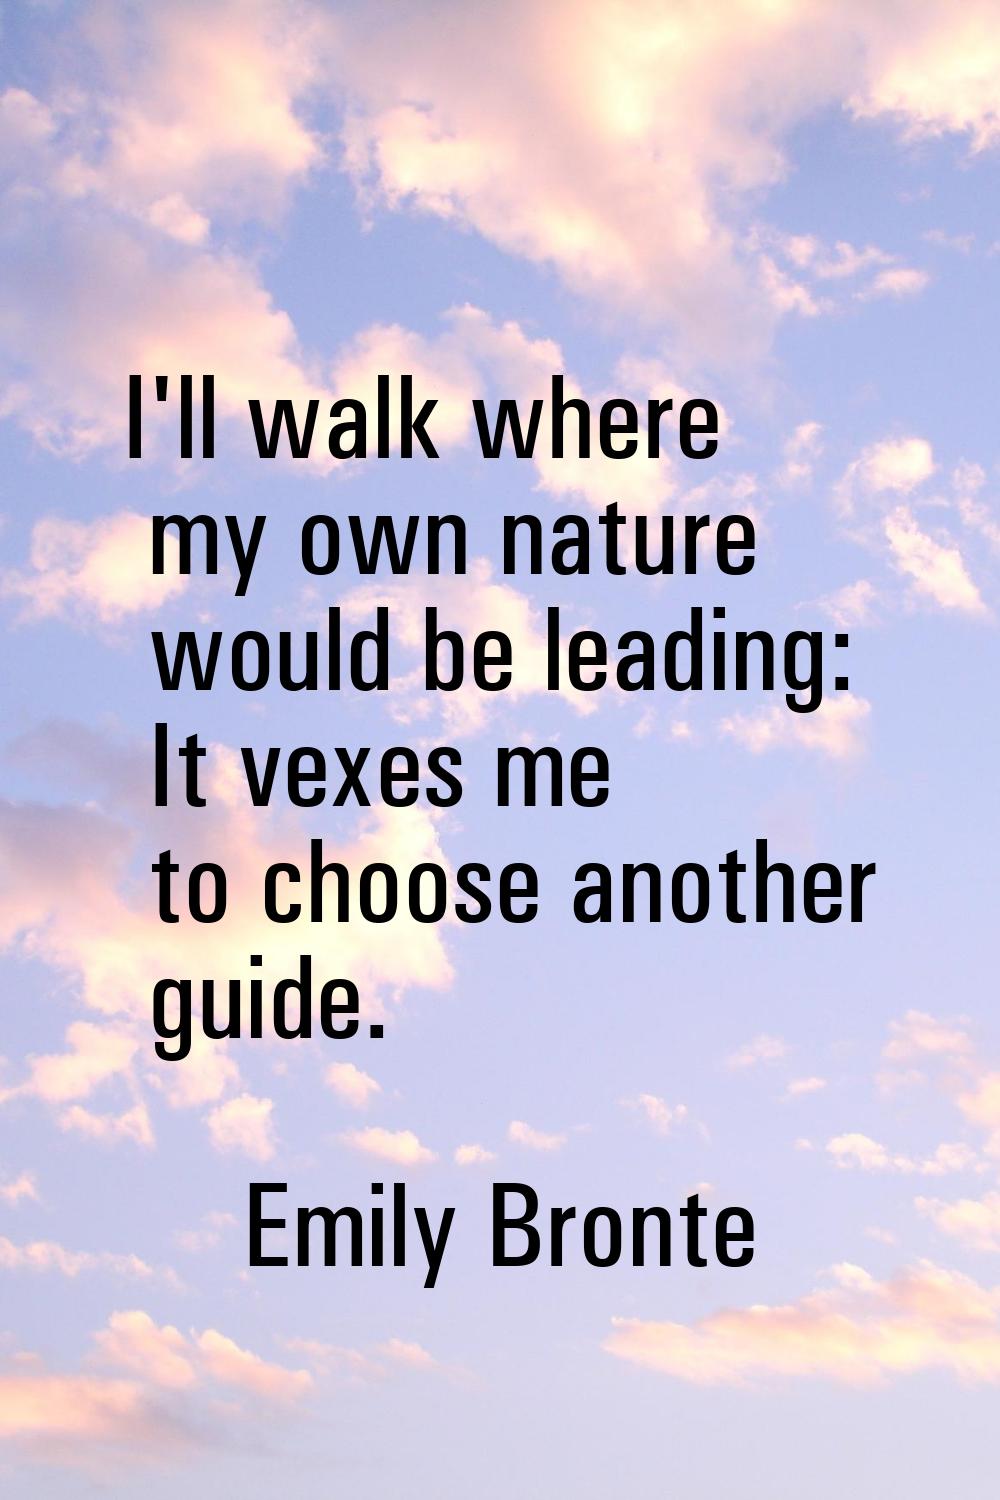 I'll walk where my own nature would be leading: It vexes me to choose another guide.